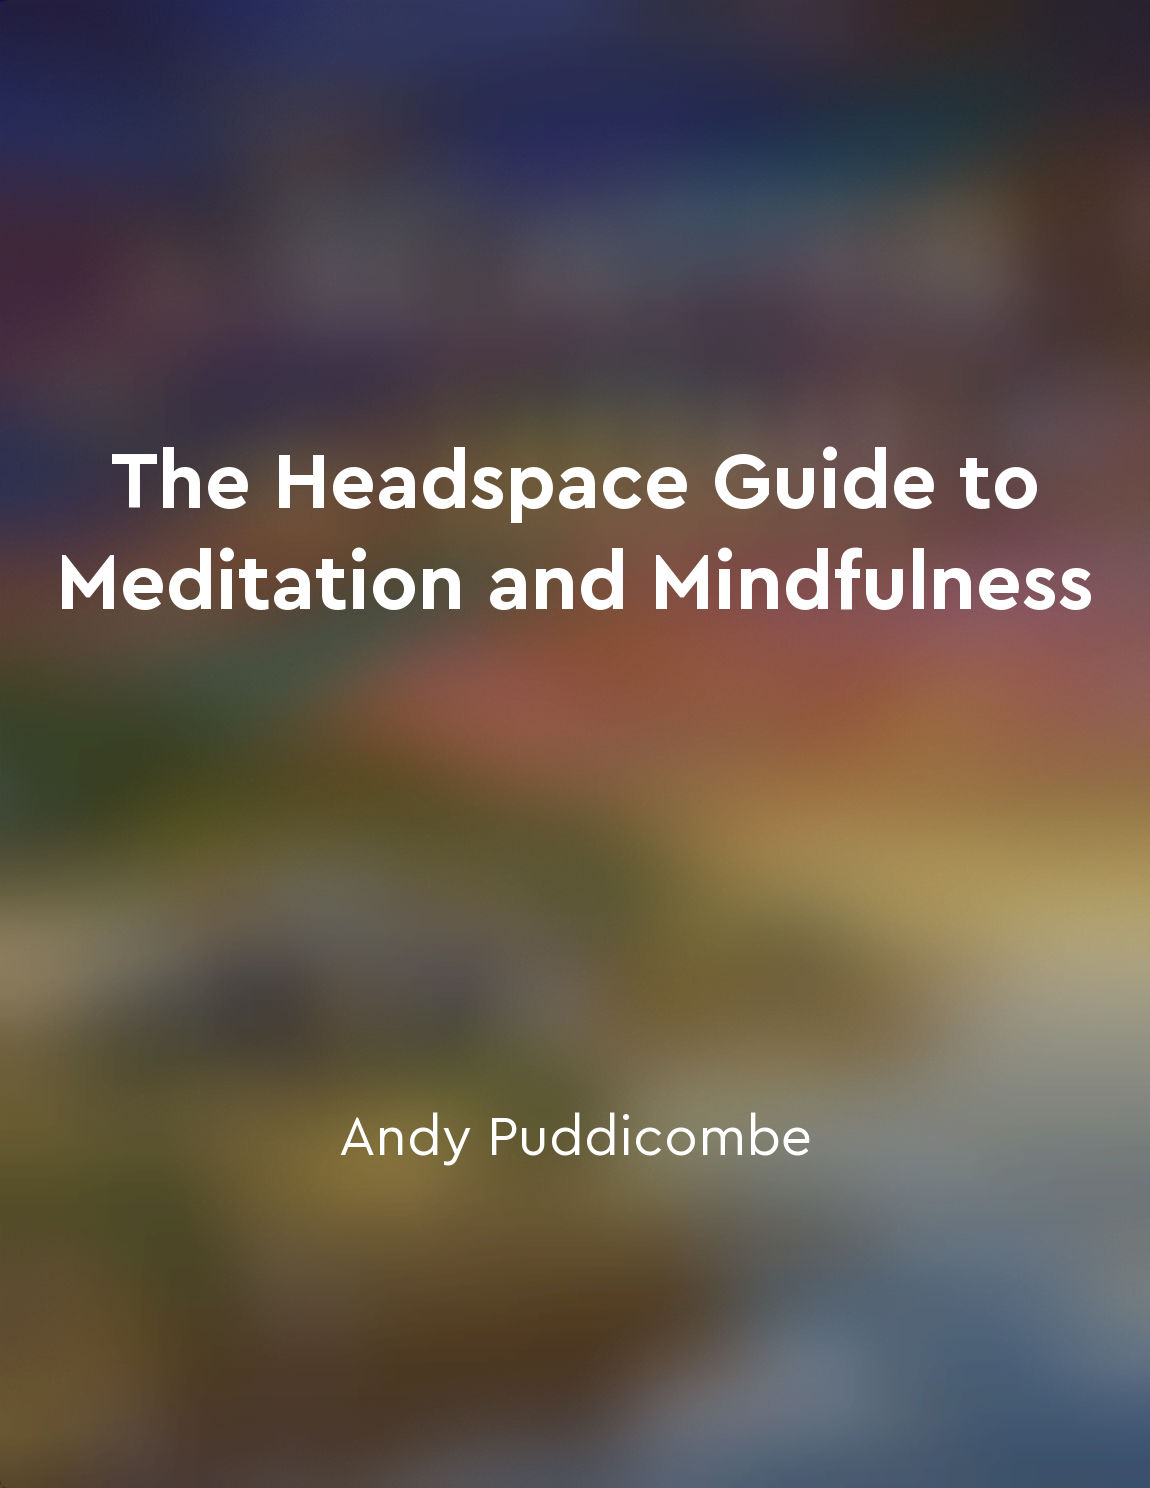 Create a dedicated space for meditation in your home